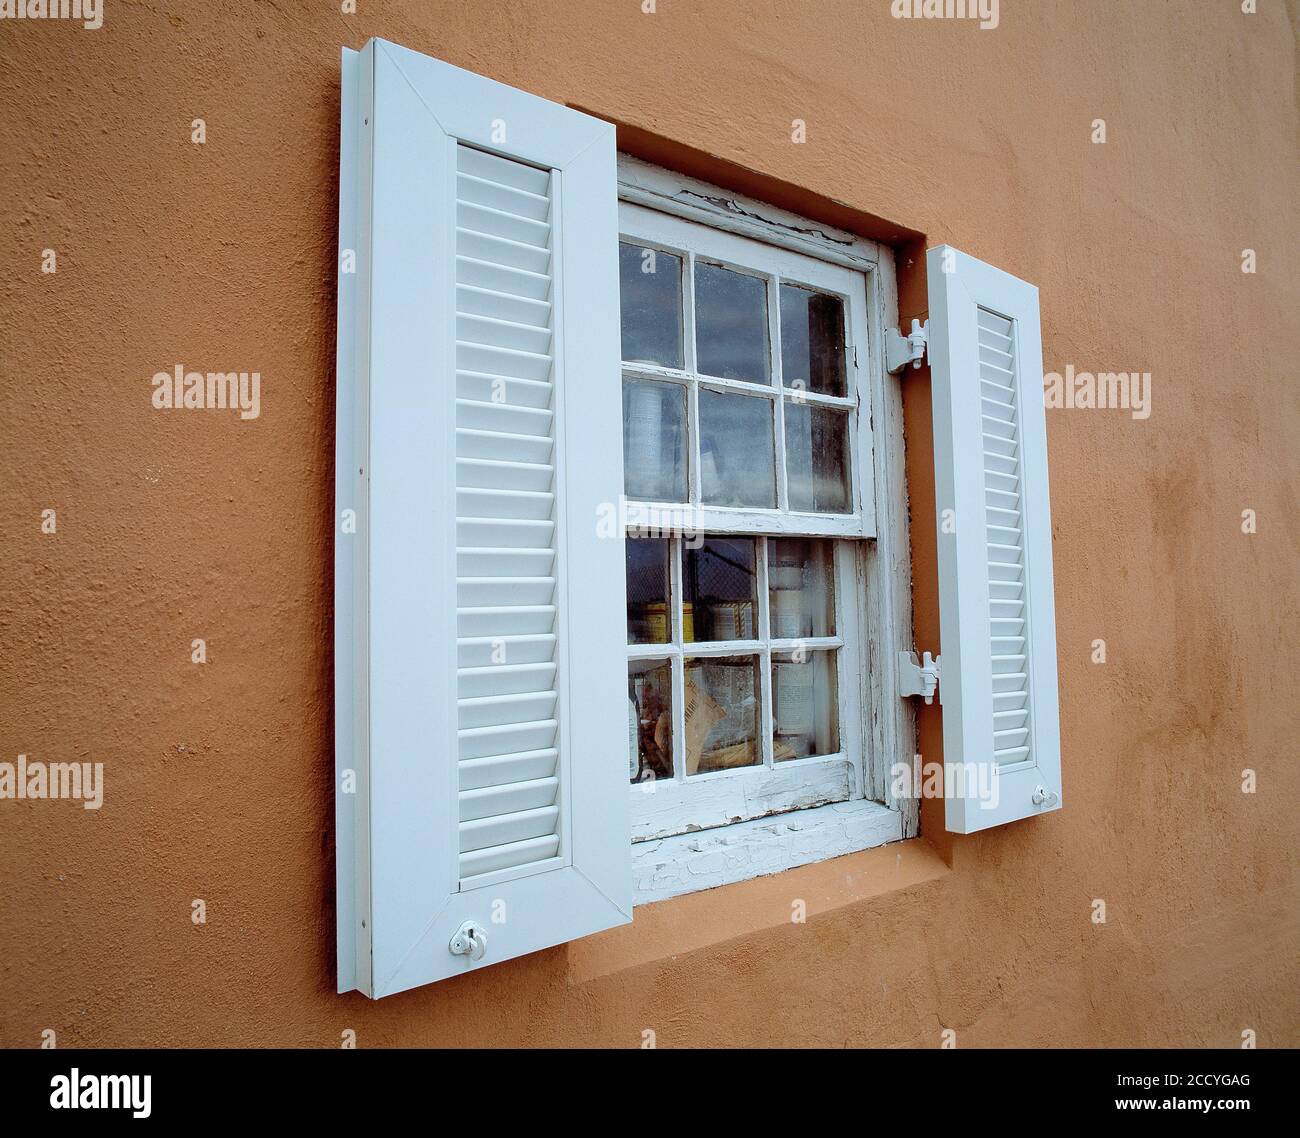 Guernsey. Architecture. Old house. Exterior of sash window with louvred shutters. Stock Photo